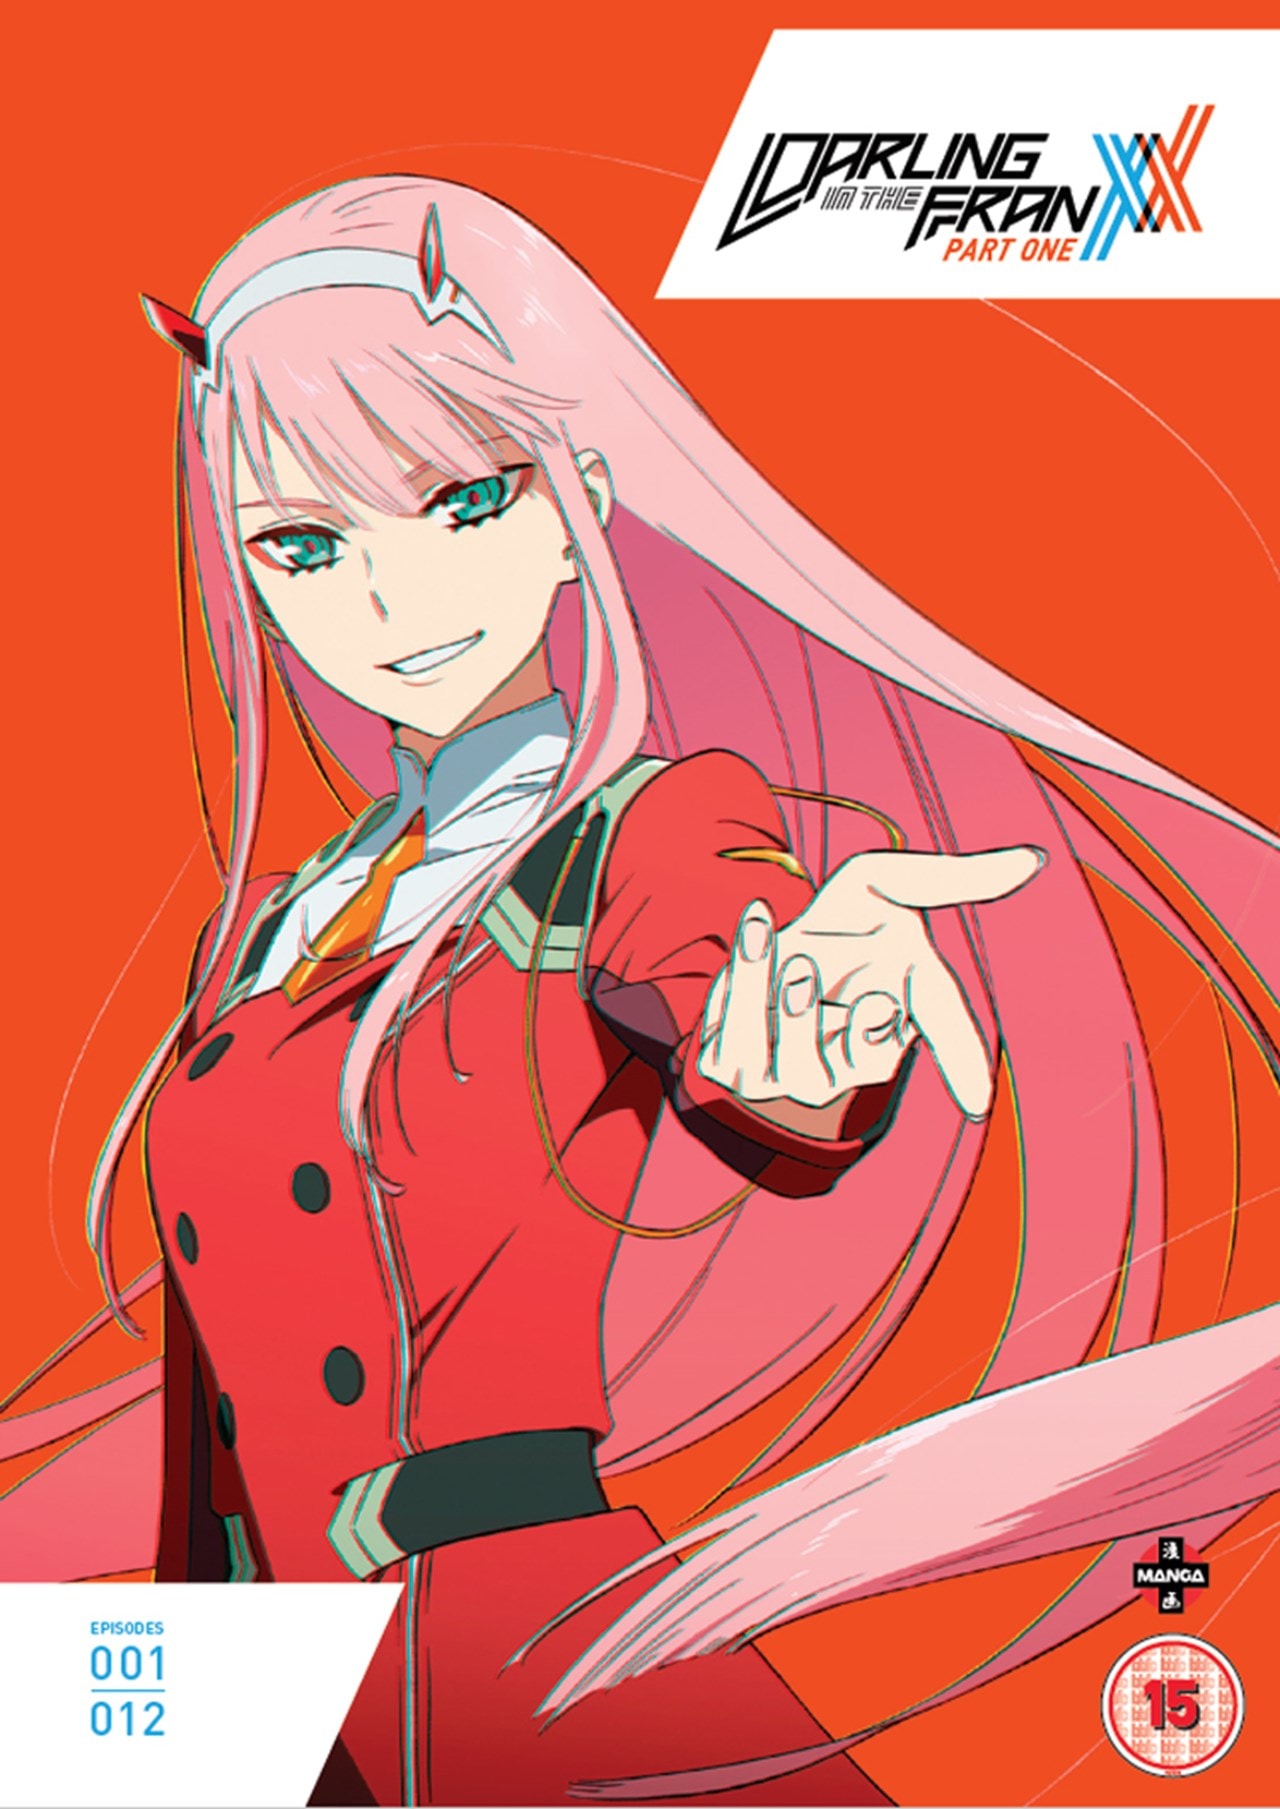 Darling in the Franxx - Part One | DVD | Free shipping over £20 | HMV Store